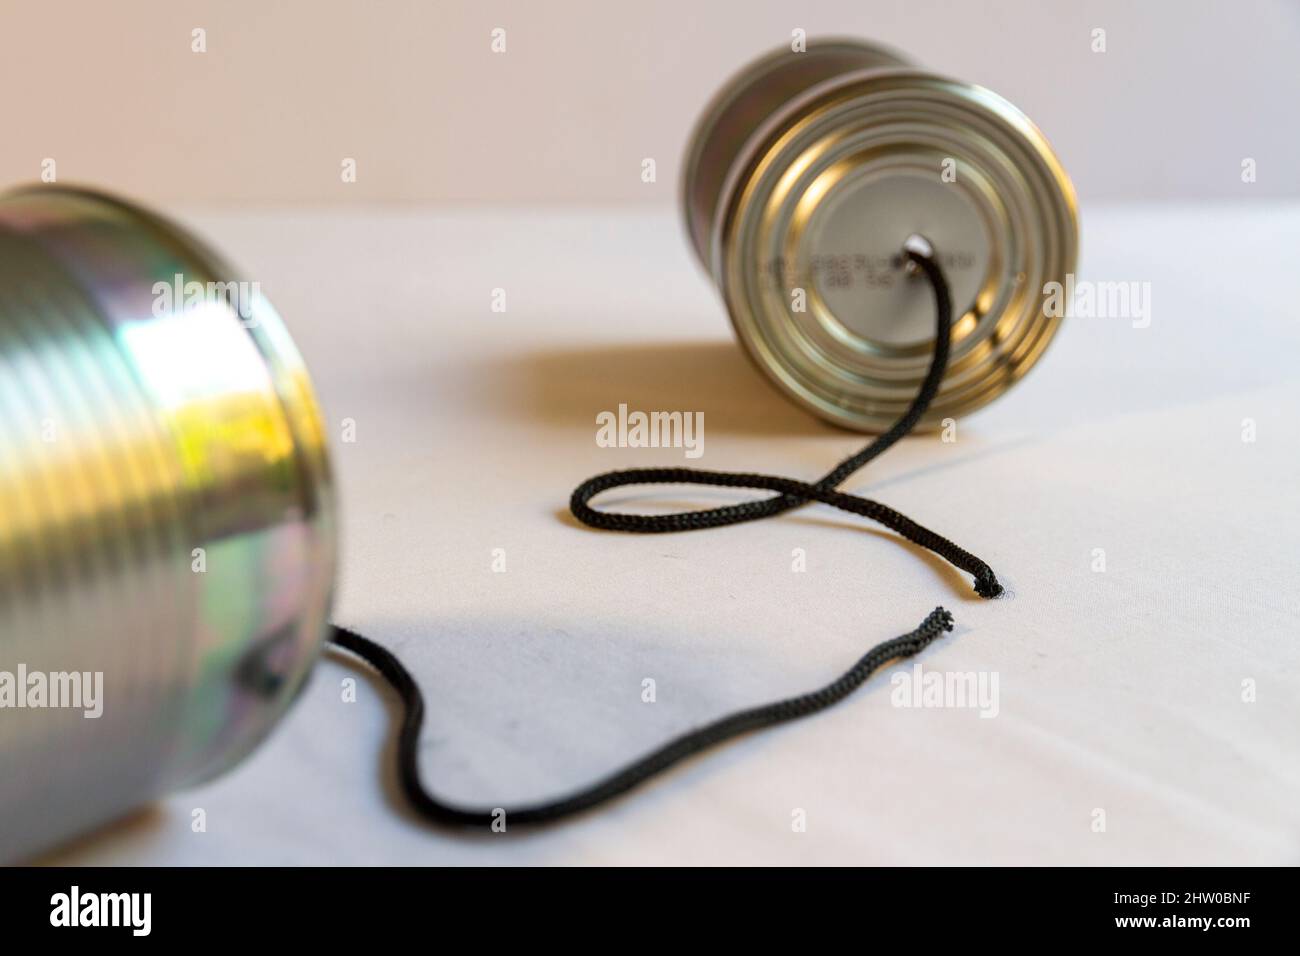 Two tin cans with a cut cord between them suggesting broken communication.Landscape orientation Stock Photo